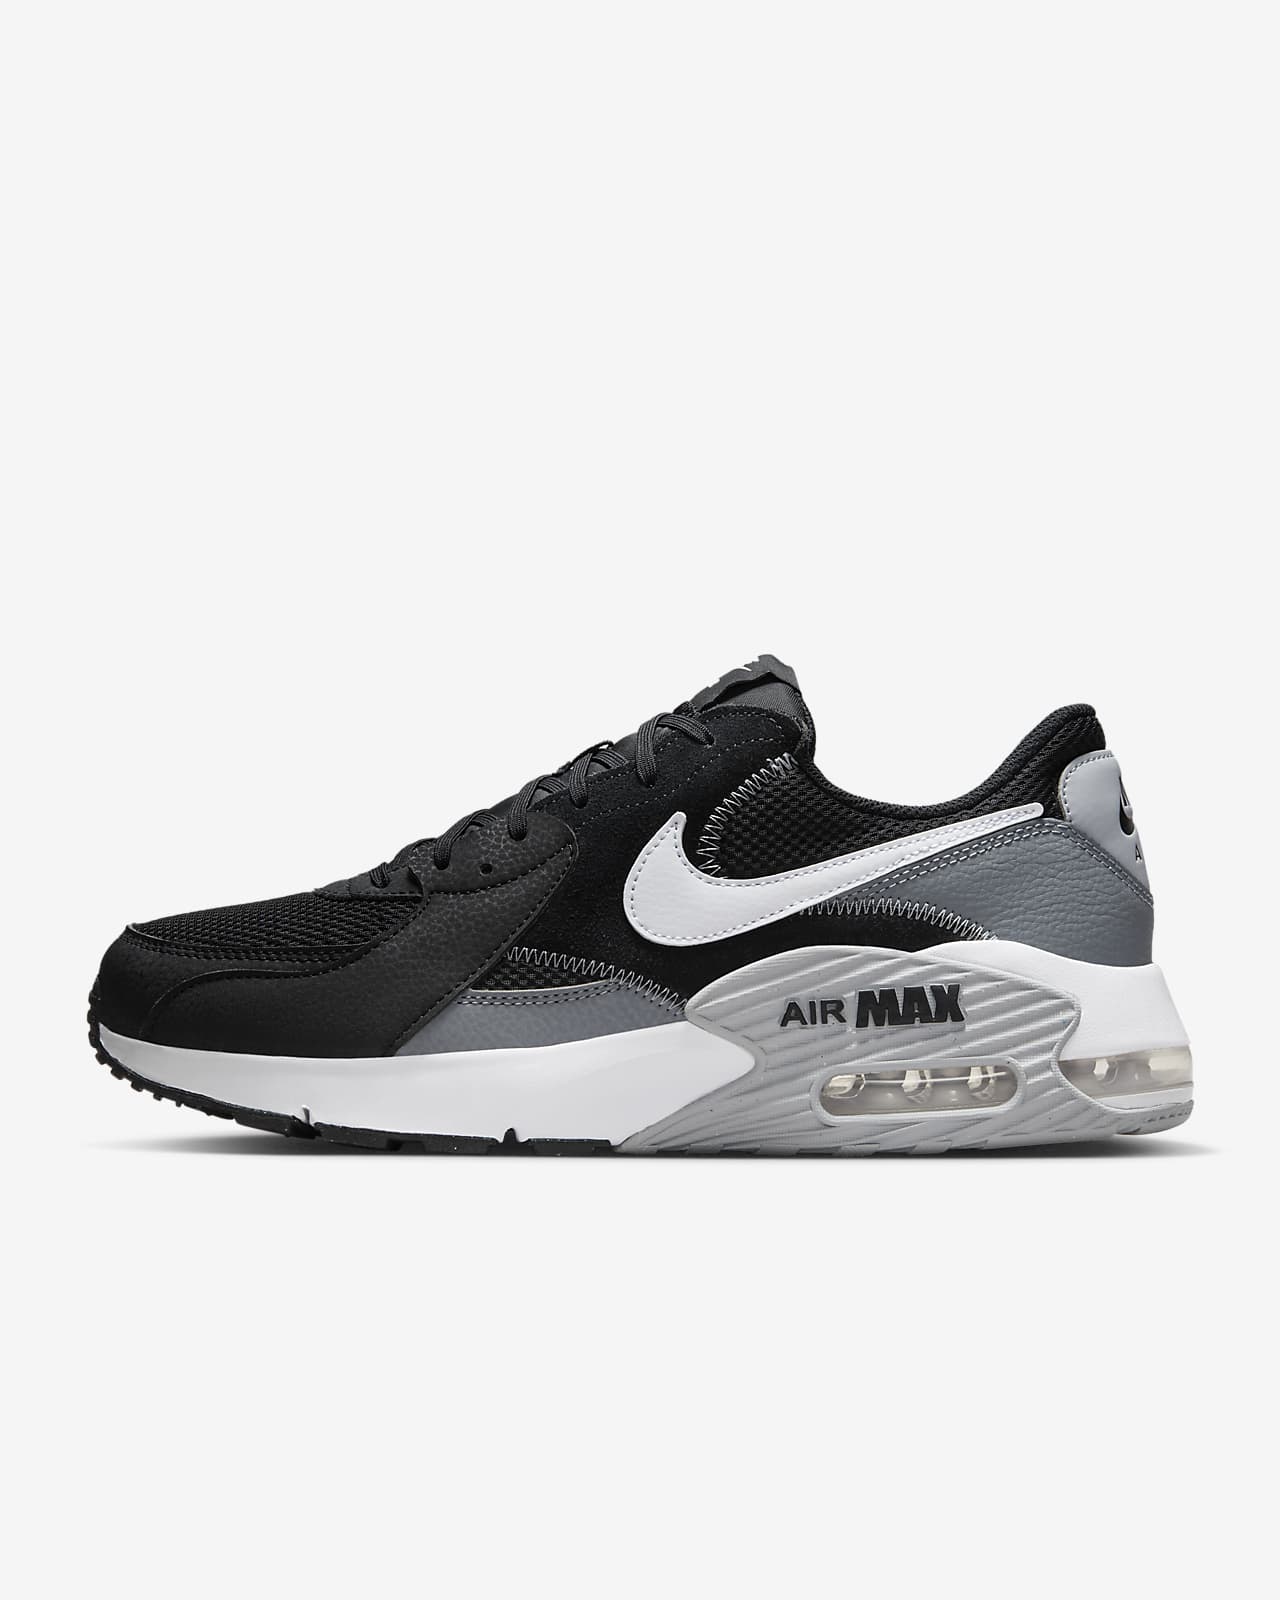 Authentic Nike Air Max Excee / CD4165 005 / Black/White-University